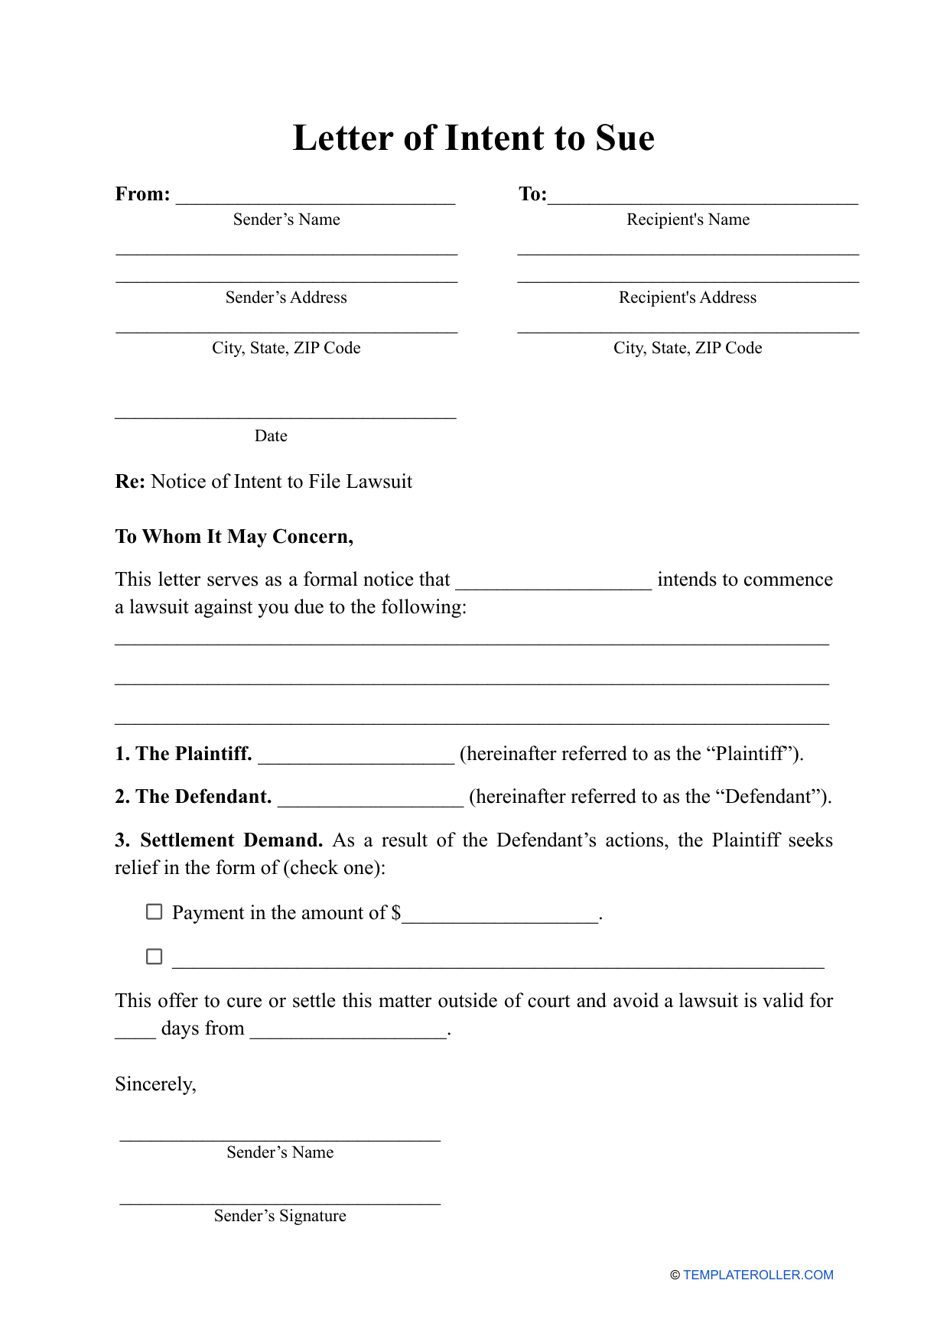 Letter of Intent to Sue Template Download Printable PDF Templateroller